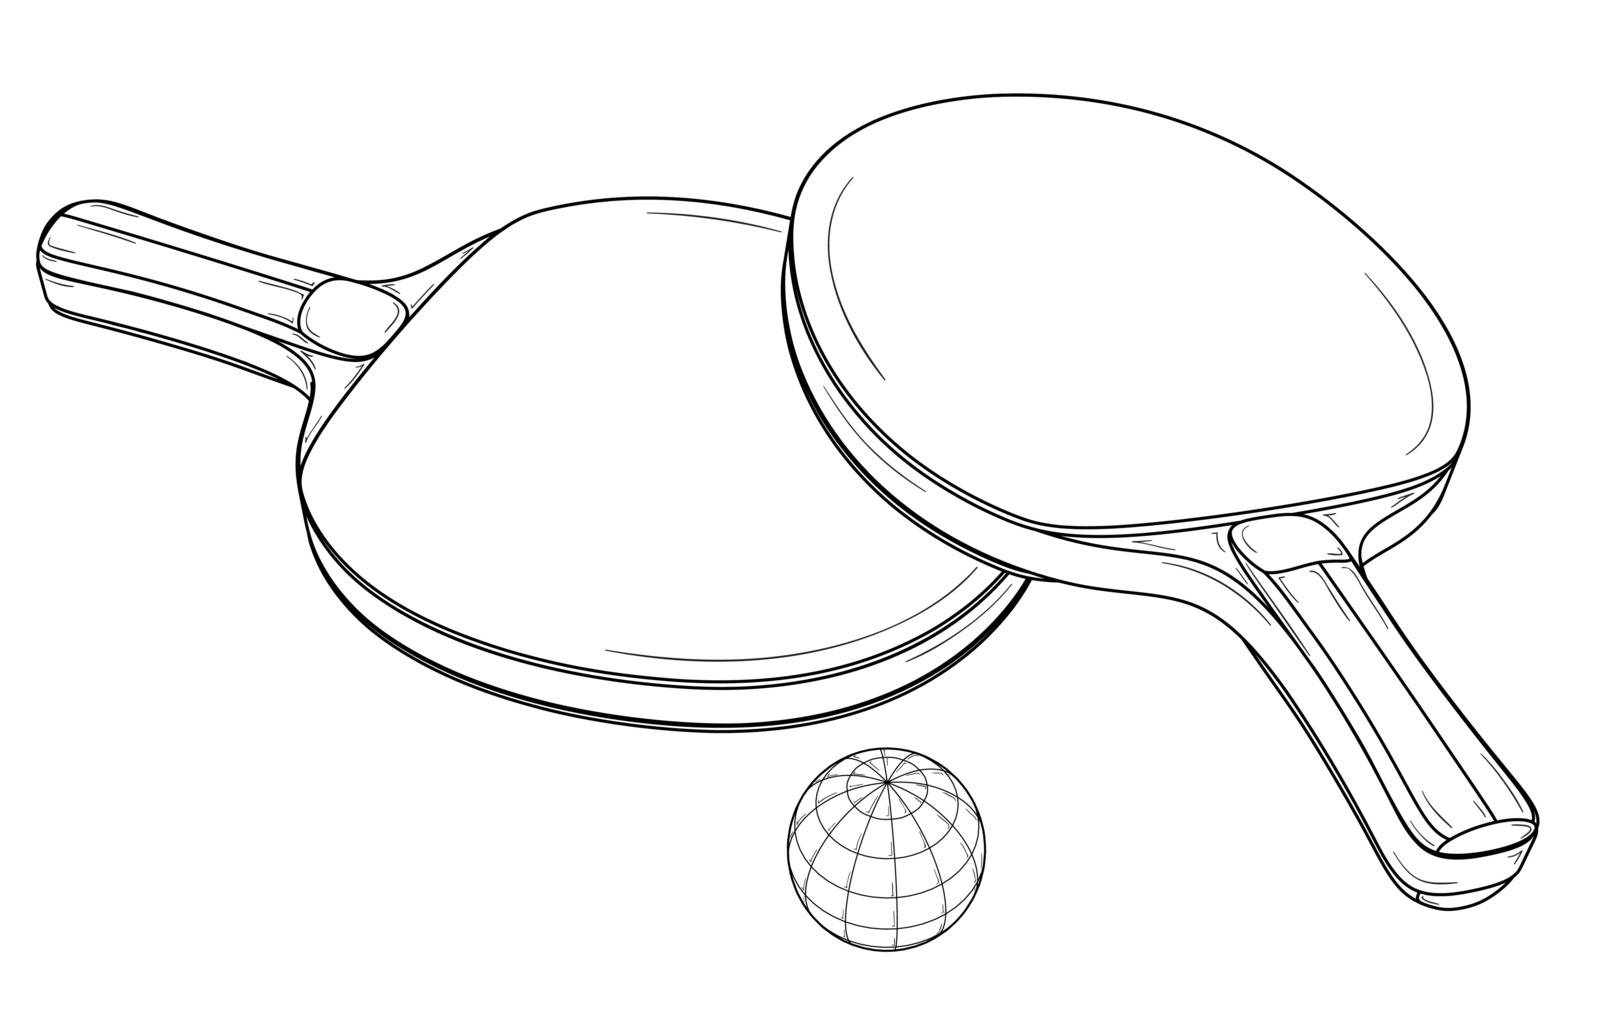 Two table tennis or ping pong rackets and ball. Sports equipment. Black outline illustration on white background. Sketch.